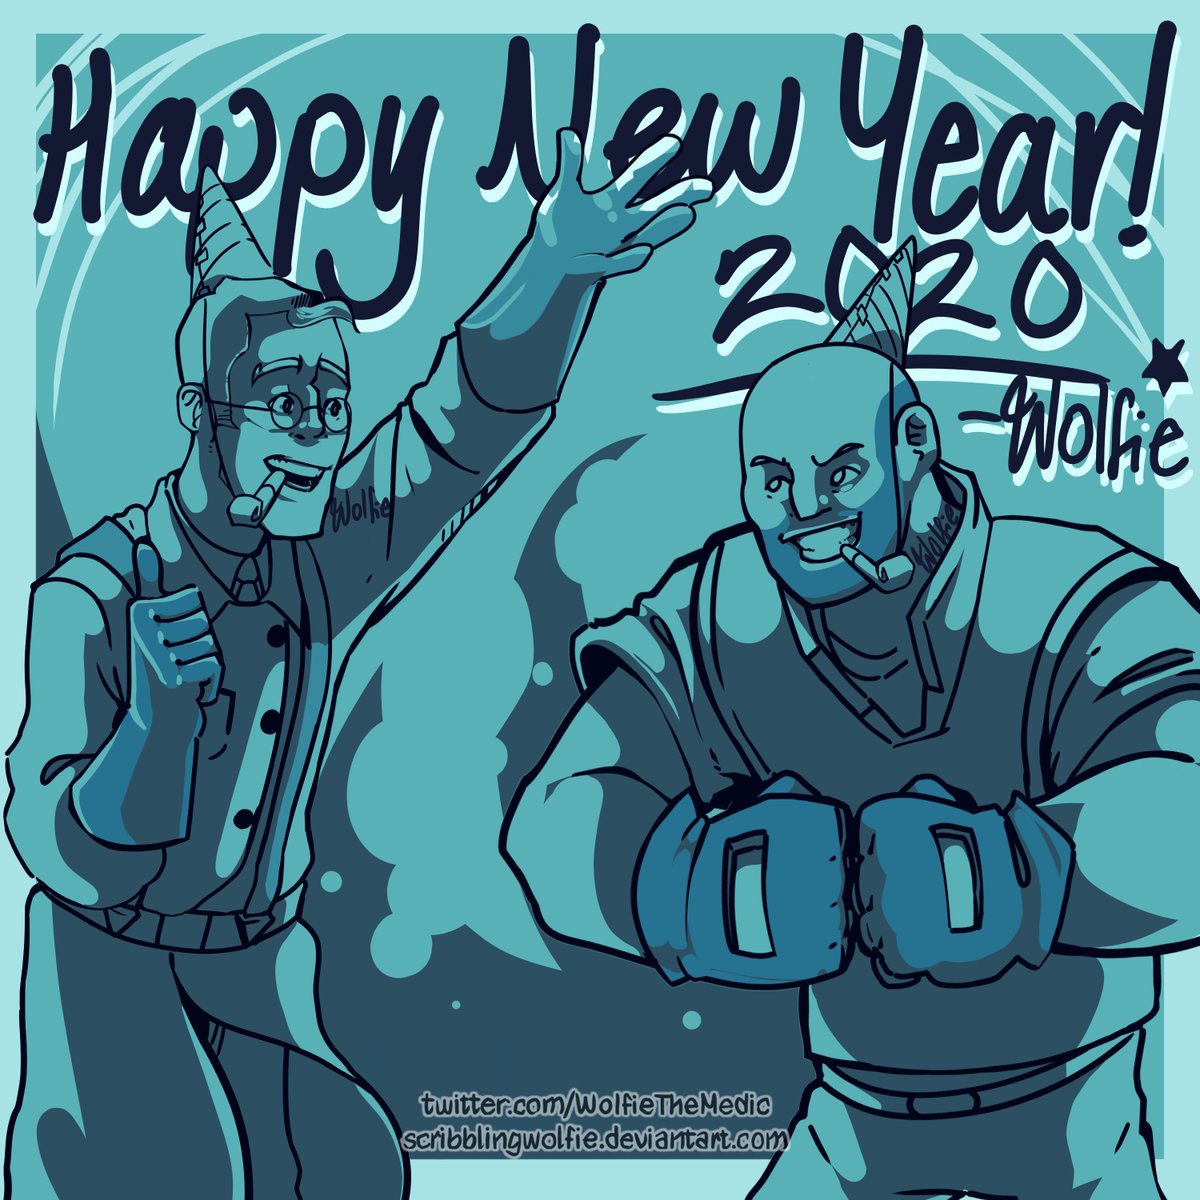 I START EVERY YEAR WITH TF2 ART! I'm bit burned out from all the secret santa artworks so it's a very limited color palette

Higher Quality:
artstation.com/artwork/58xk9O

newgrounds.com/art/view/scrib…

deviantart.com/scribblingwolf…

#HappyNewYear #HappyNew2020 #HappyNewDecade #HappyNewYears2020